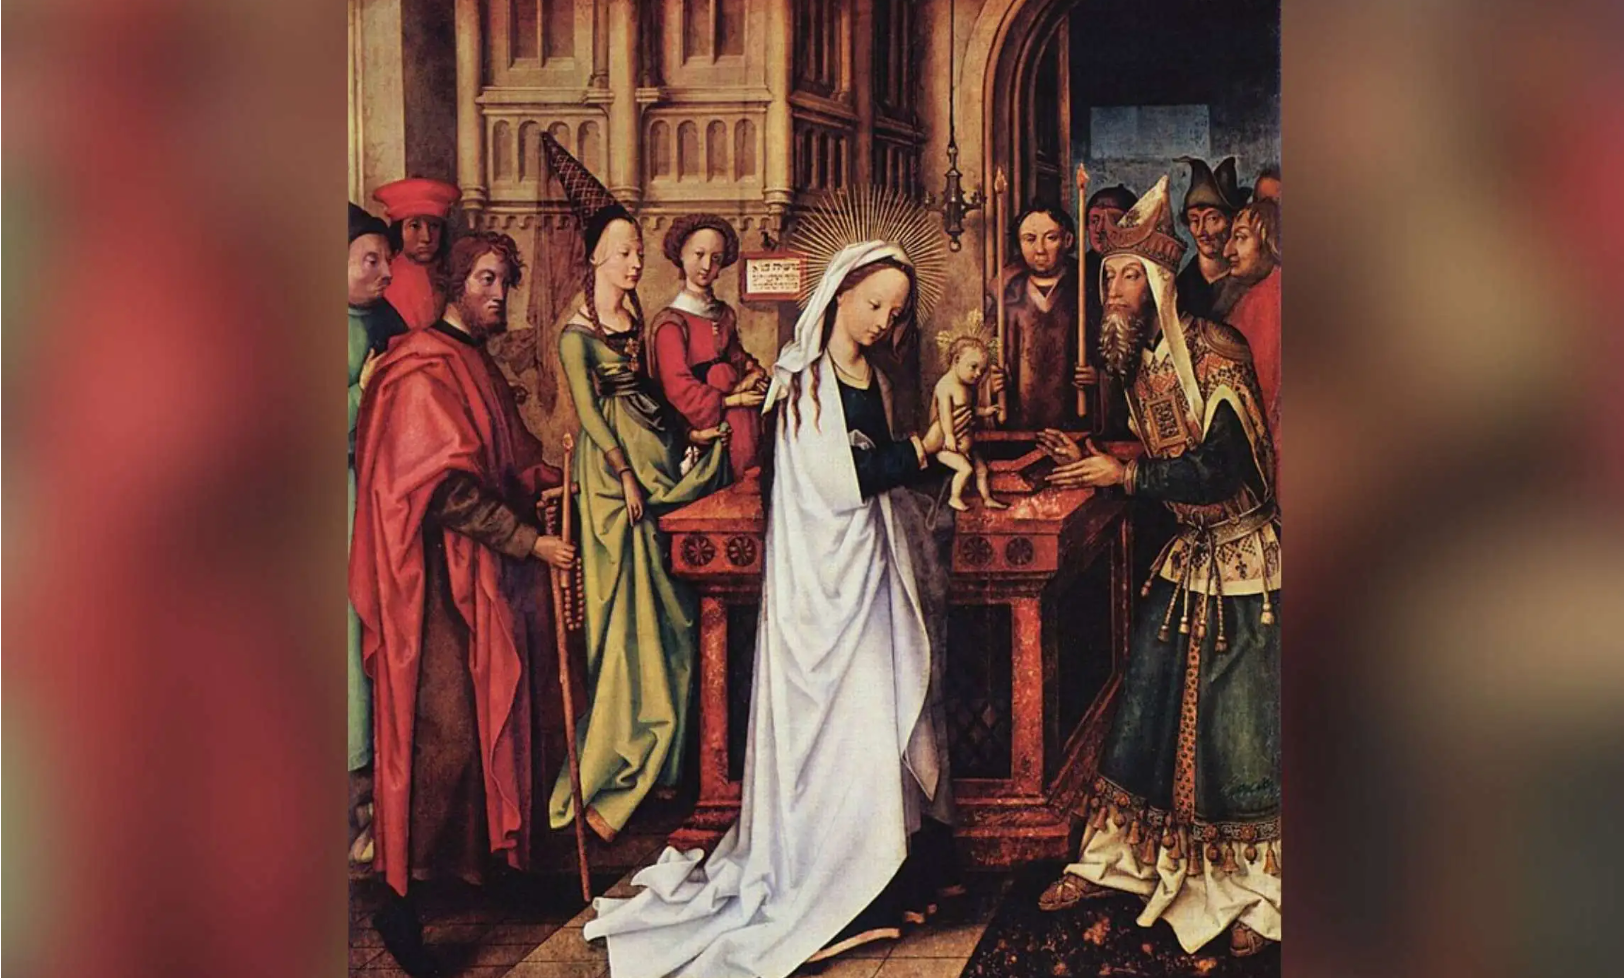 feast-of-the-presentation-of-the-lord-candlemas-brings-light-on-dark-winter-days-1